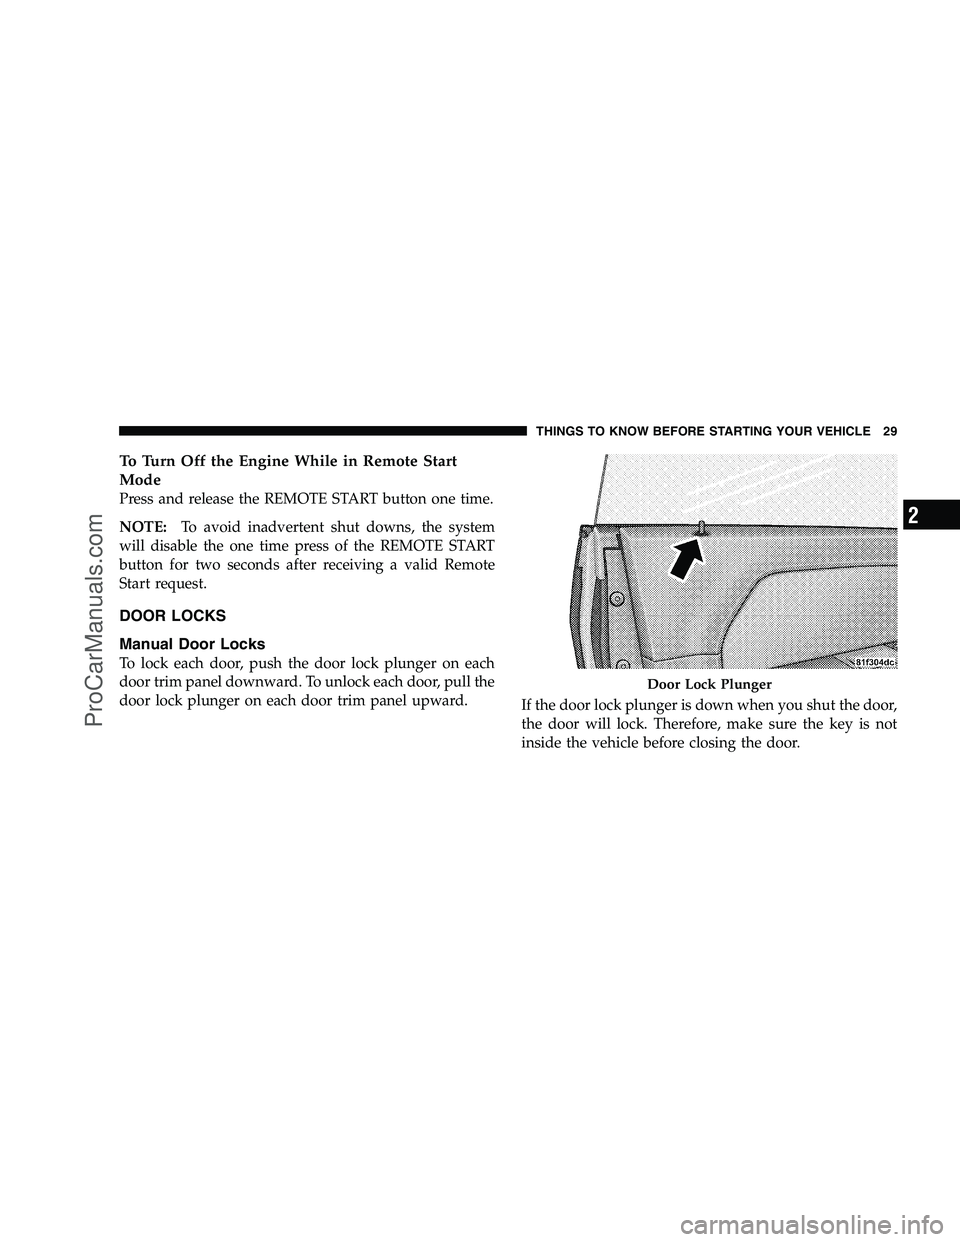 DODGE CHALLENGER 2008 Owners Guide To Turn Off the Engine While in Remote Start
Mode
Press and release the REMOTE START button one time.
NOTE:To avoid inadvertent shut downs, the system
will disable the one time press of the REMOTE STA